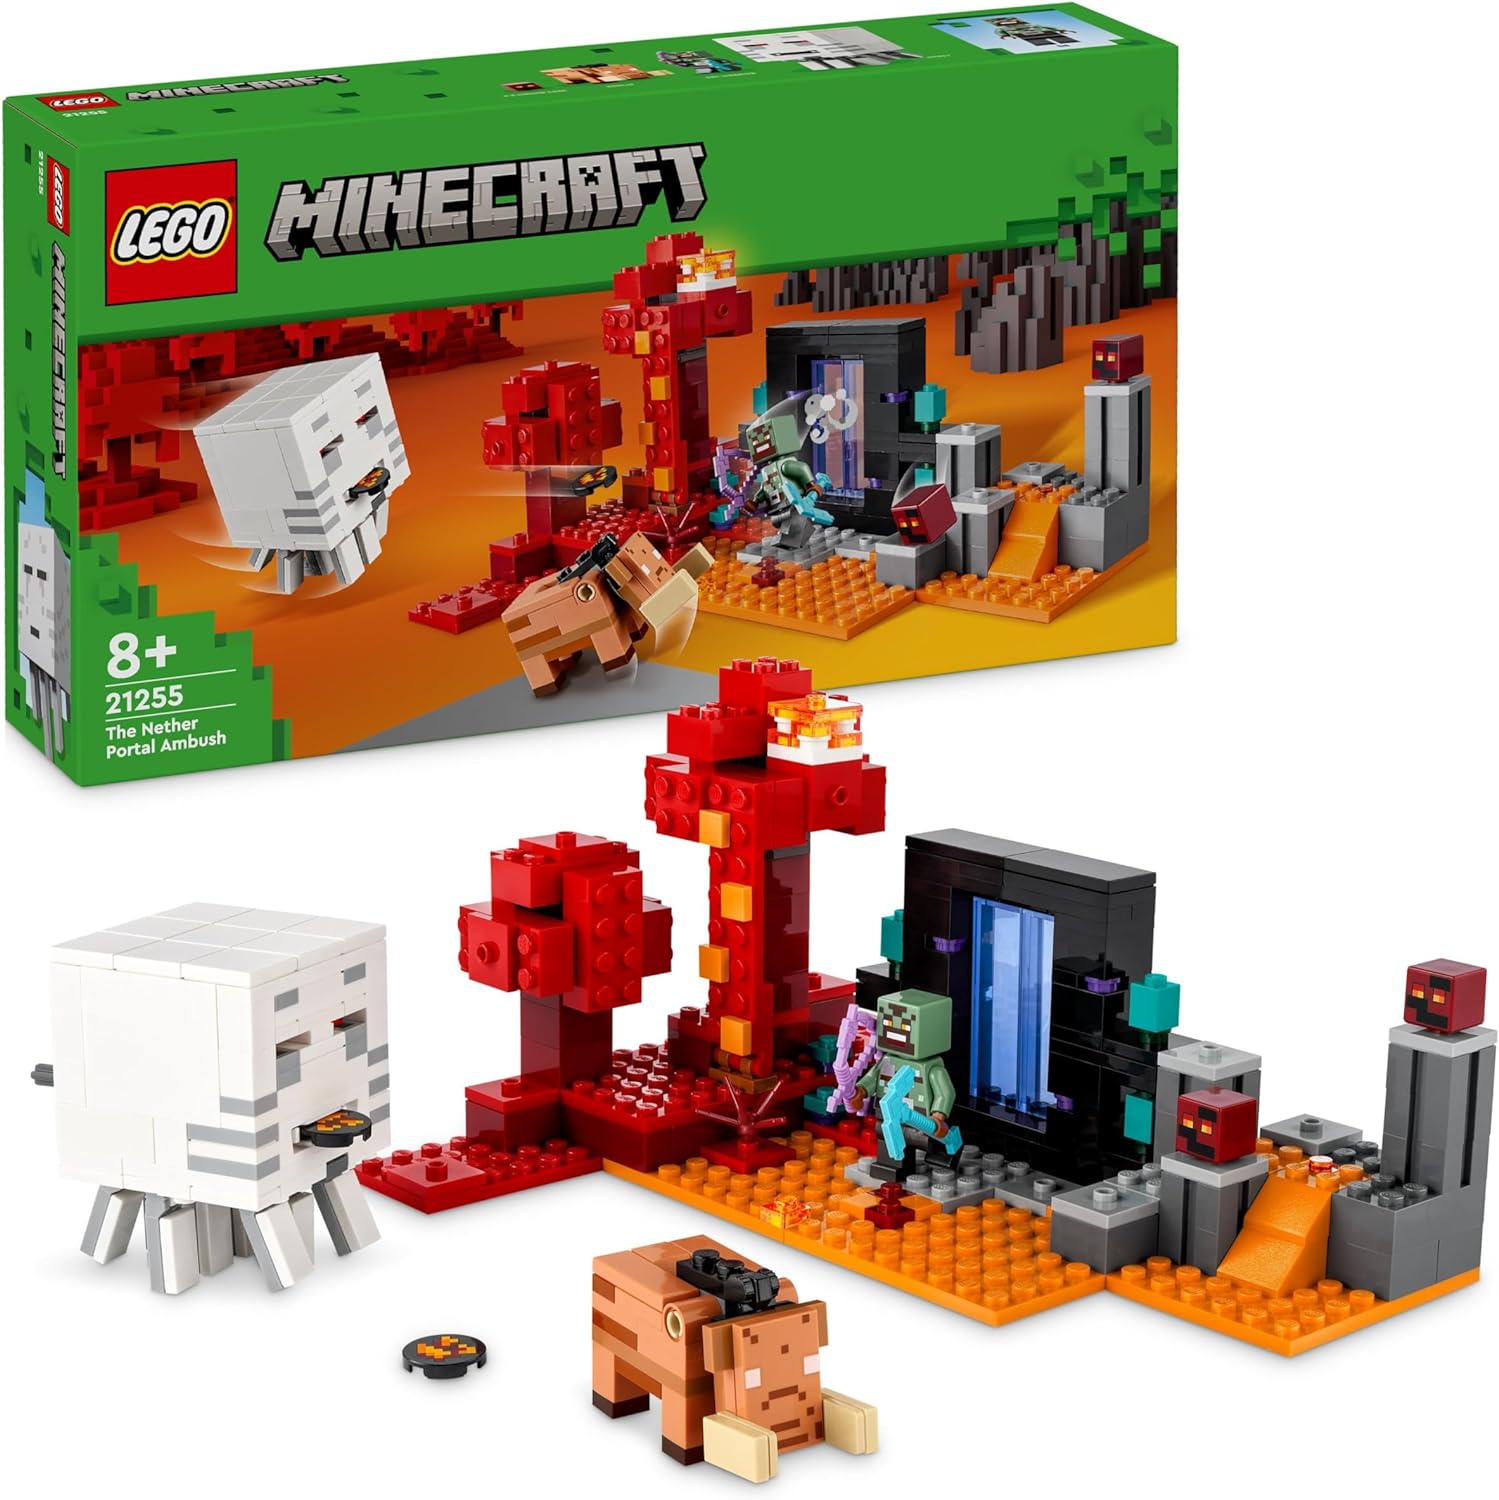 LEGO Minecraft Ambush on the Netherportal, Gaming Toy in Nether for Children with Battle Scenes and Legendary Figures Including Guest, Gift for Gamer Boys and Girls from 8 Years 21255